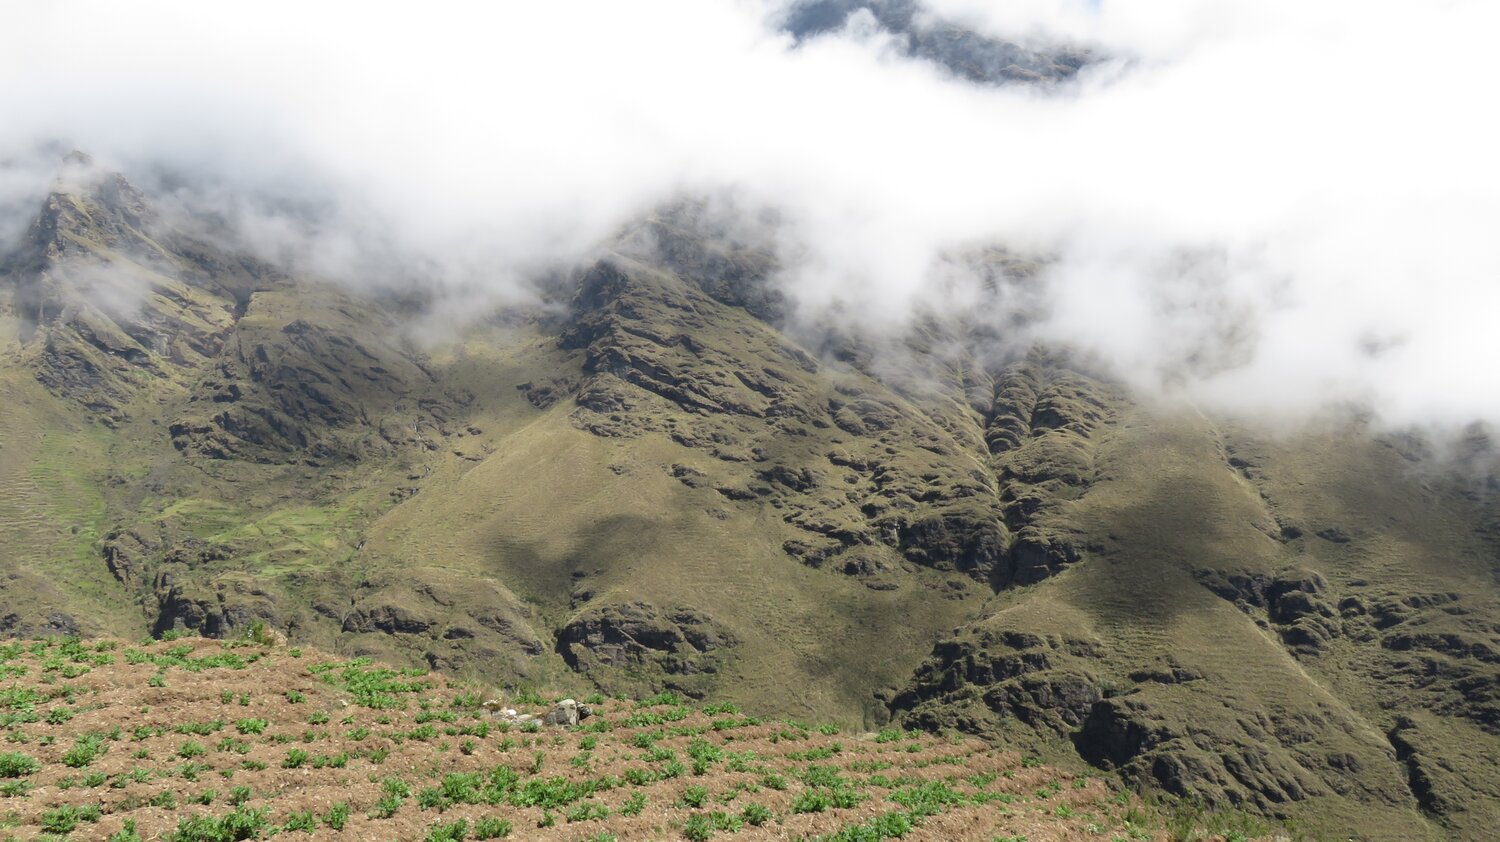 A highland Andean landscape with potato fields in the foreground. Photo: CIP